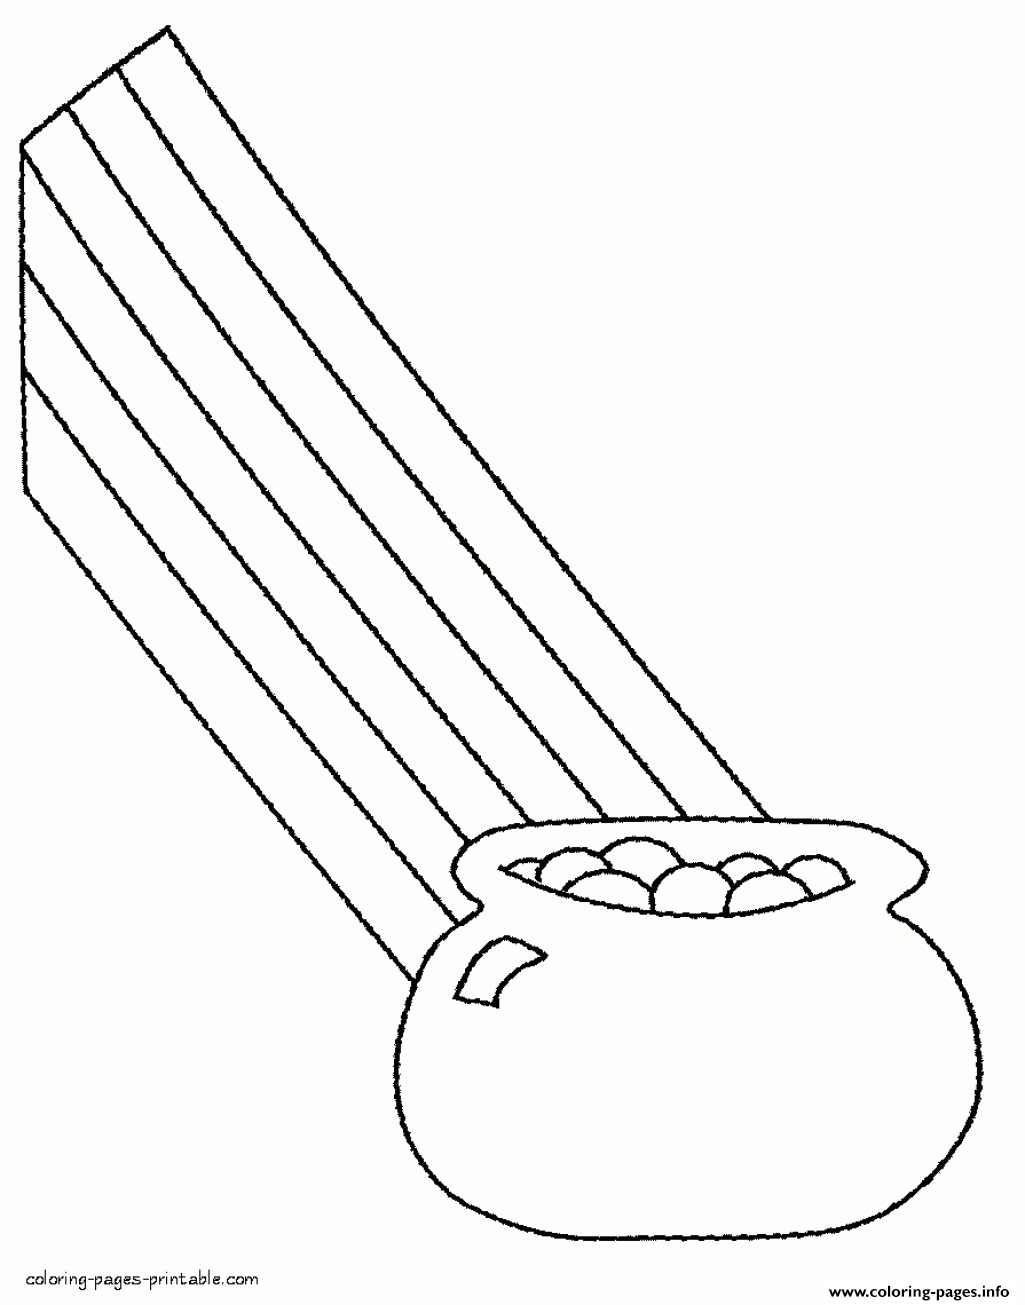 Pot Of Gold Rainbow Pot Of Gold At The End coloring pages